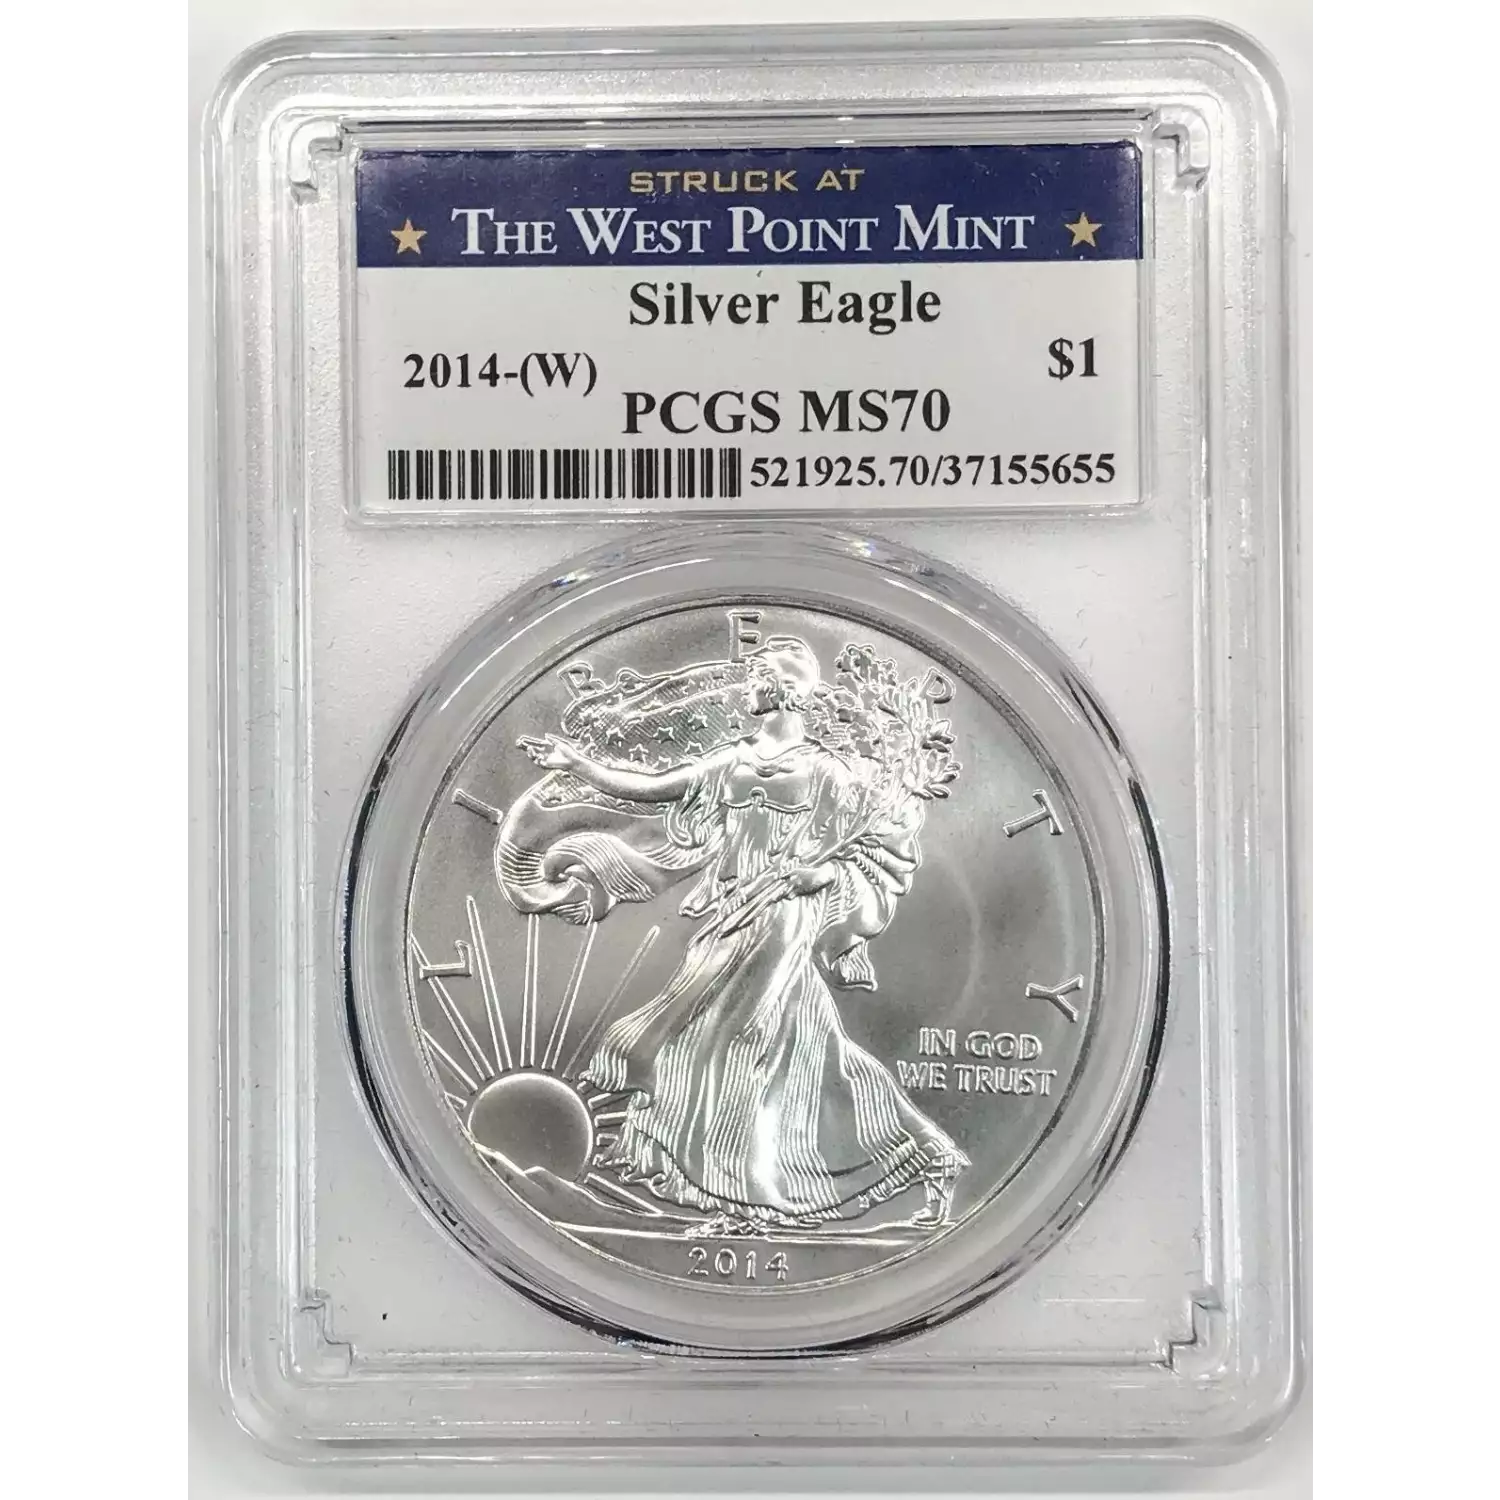 2014-(W) $1 Silver Eagle Struck at West Point